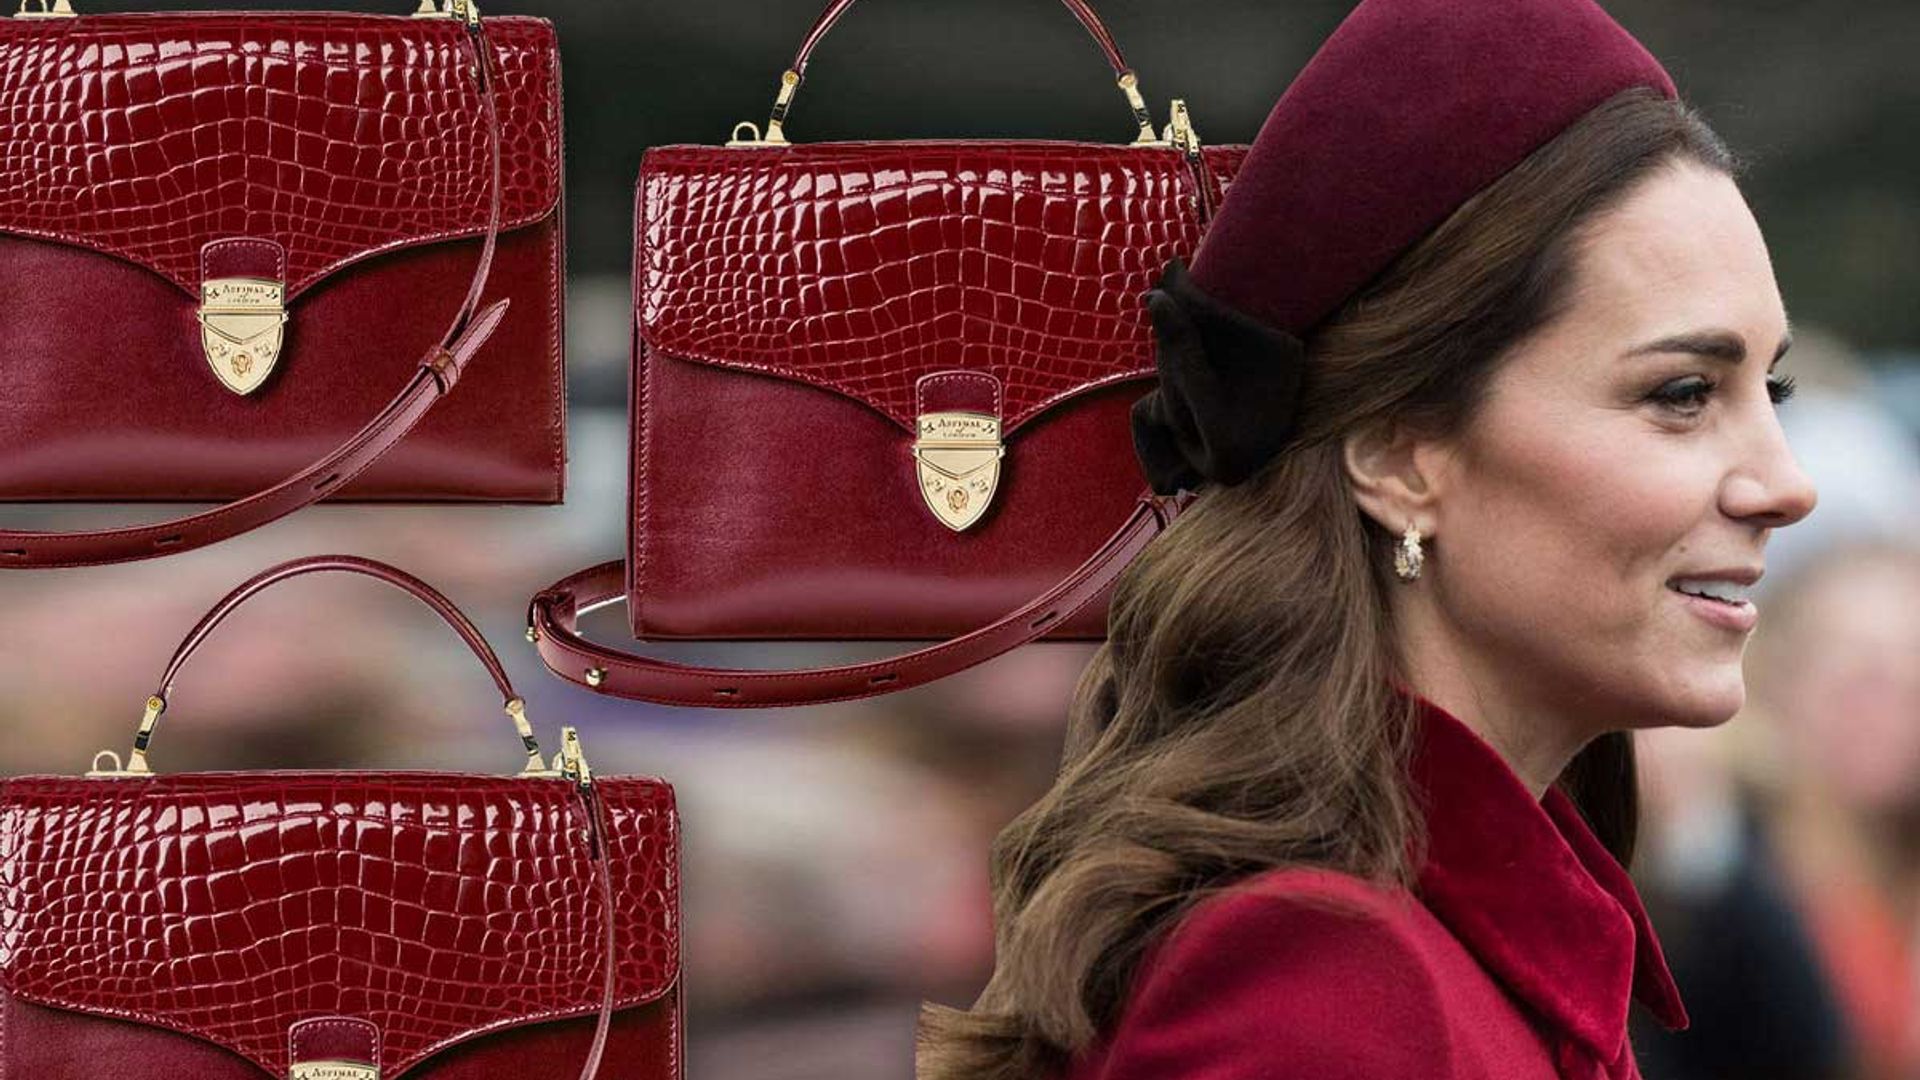 The Most Iconic Kate Spade Bag Is on Sale in So Many Colors | Us Weekly